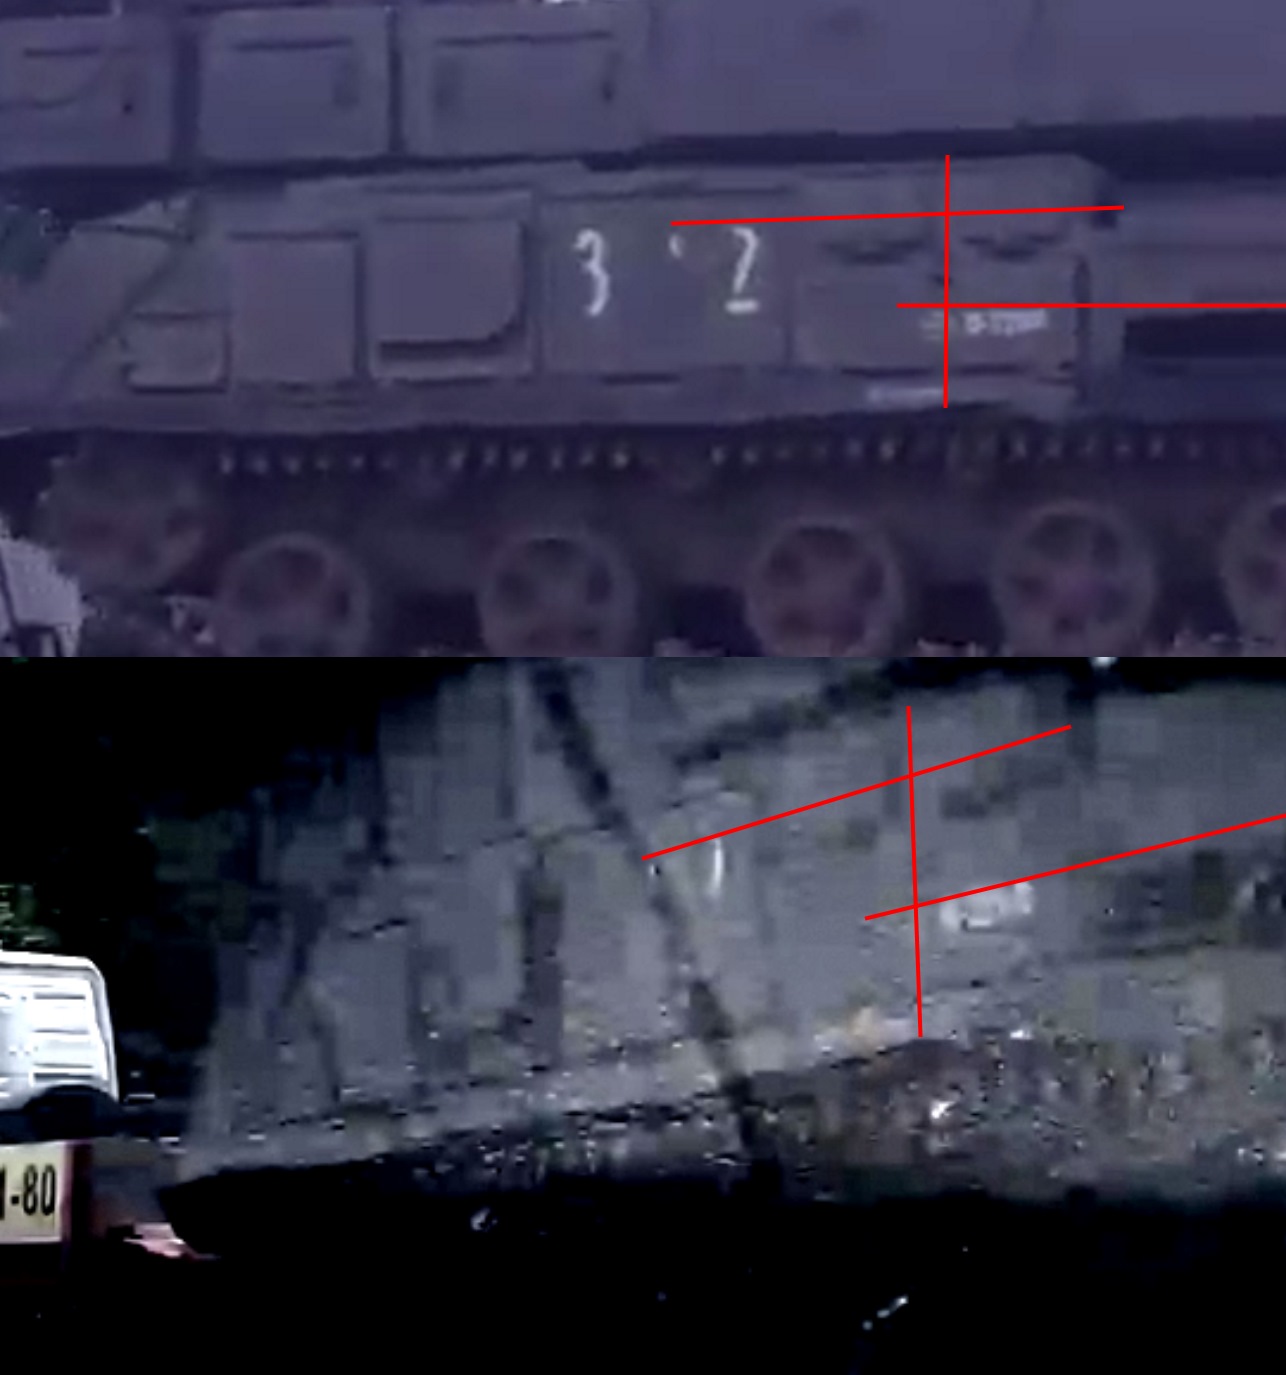 The same images as above showing where the Buk's markings line up. Note the bottom image has had its contrast adjusted for clarity.